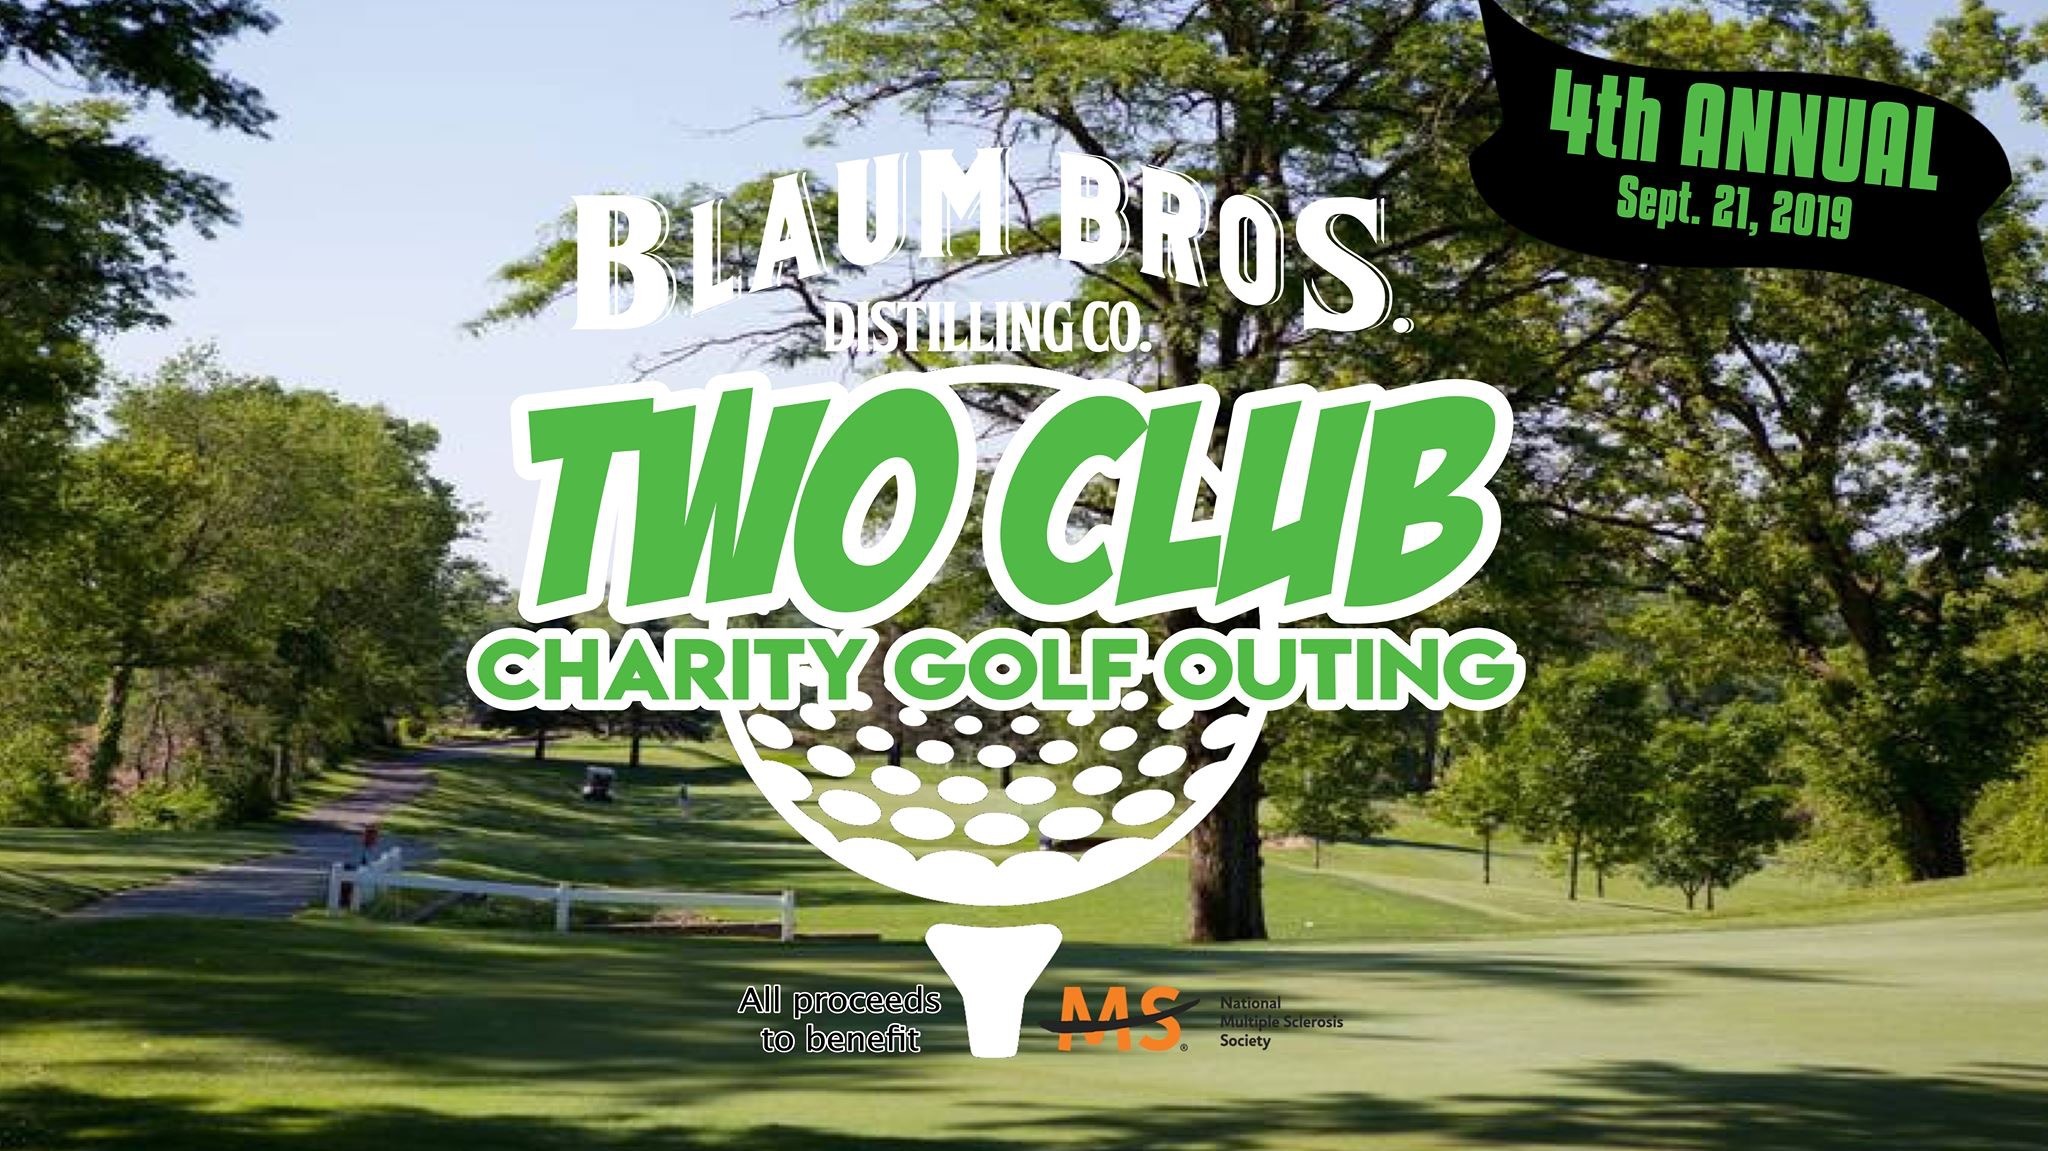 Sign Up for the Blaum Bros. Two Club Charity Outing!